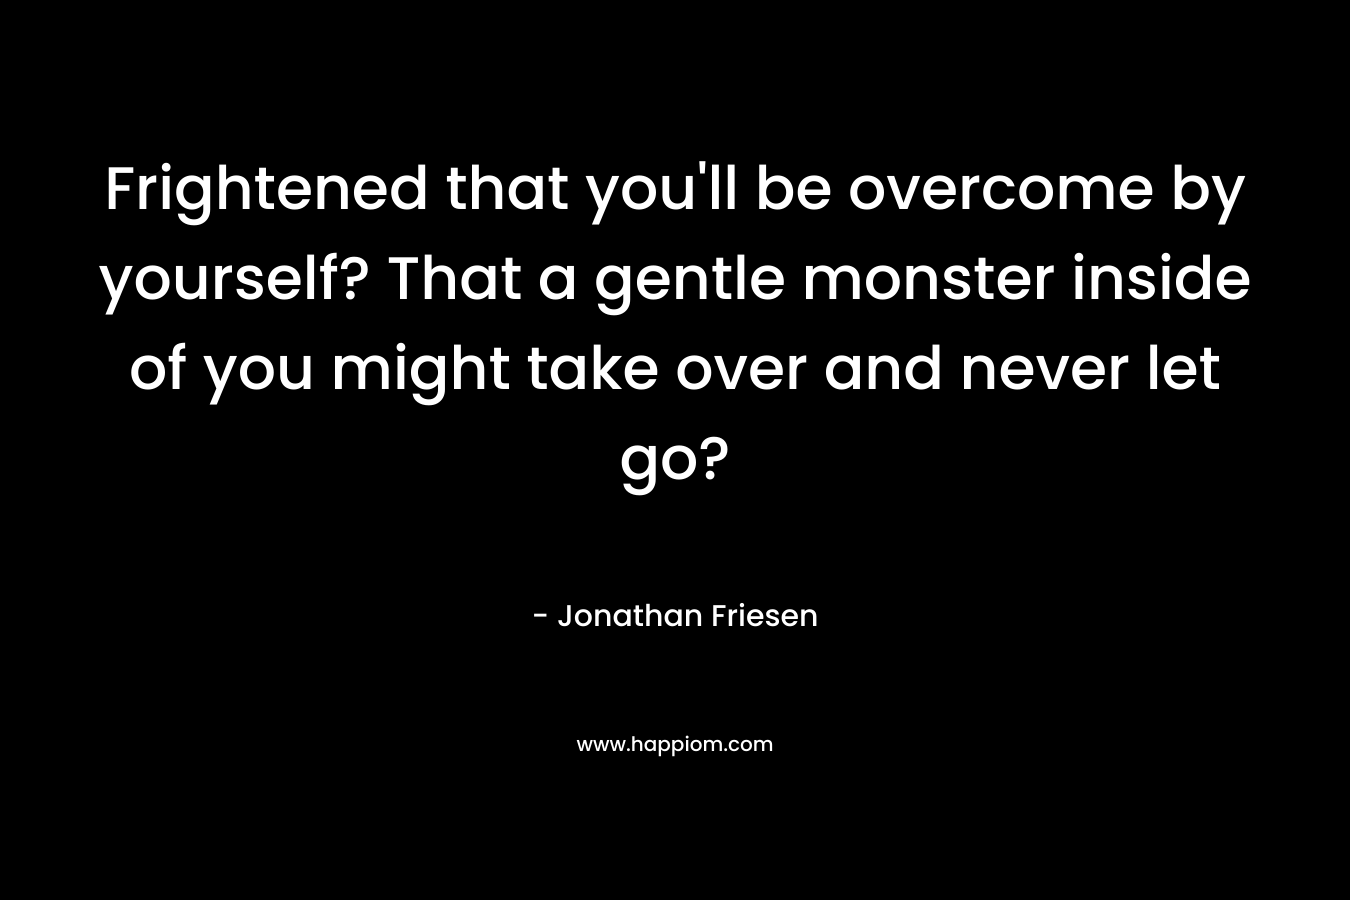 Frightened that you’ll be overcome by yourself? That a gentle monster inside of you might take over and never let go? – Jonathan Friesen